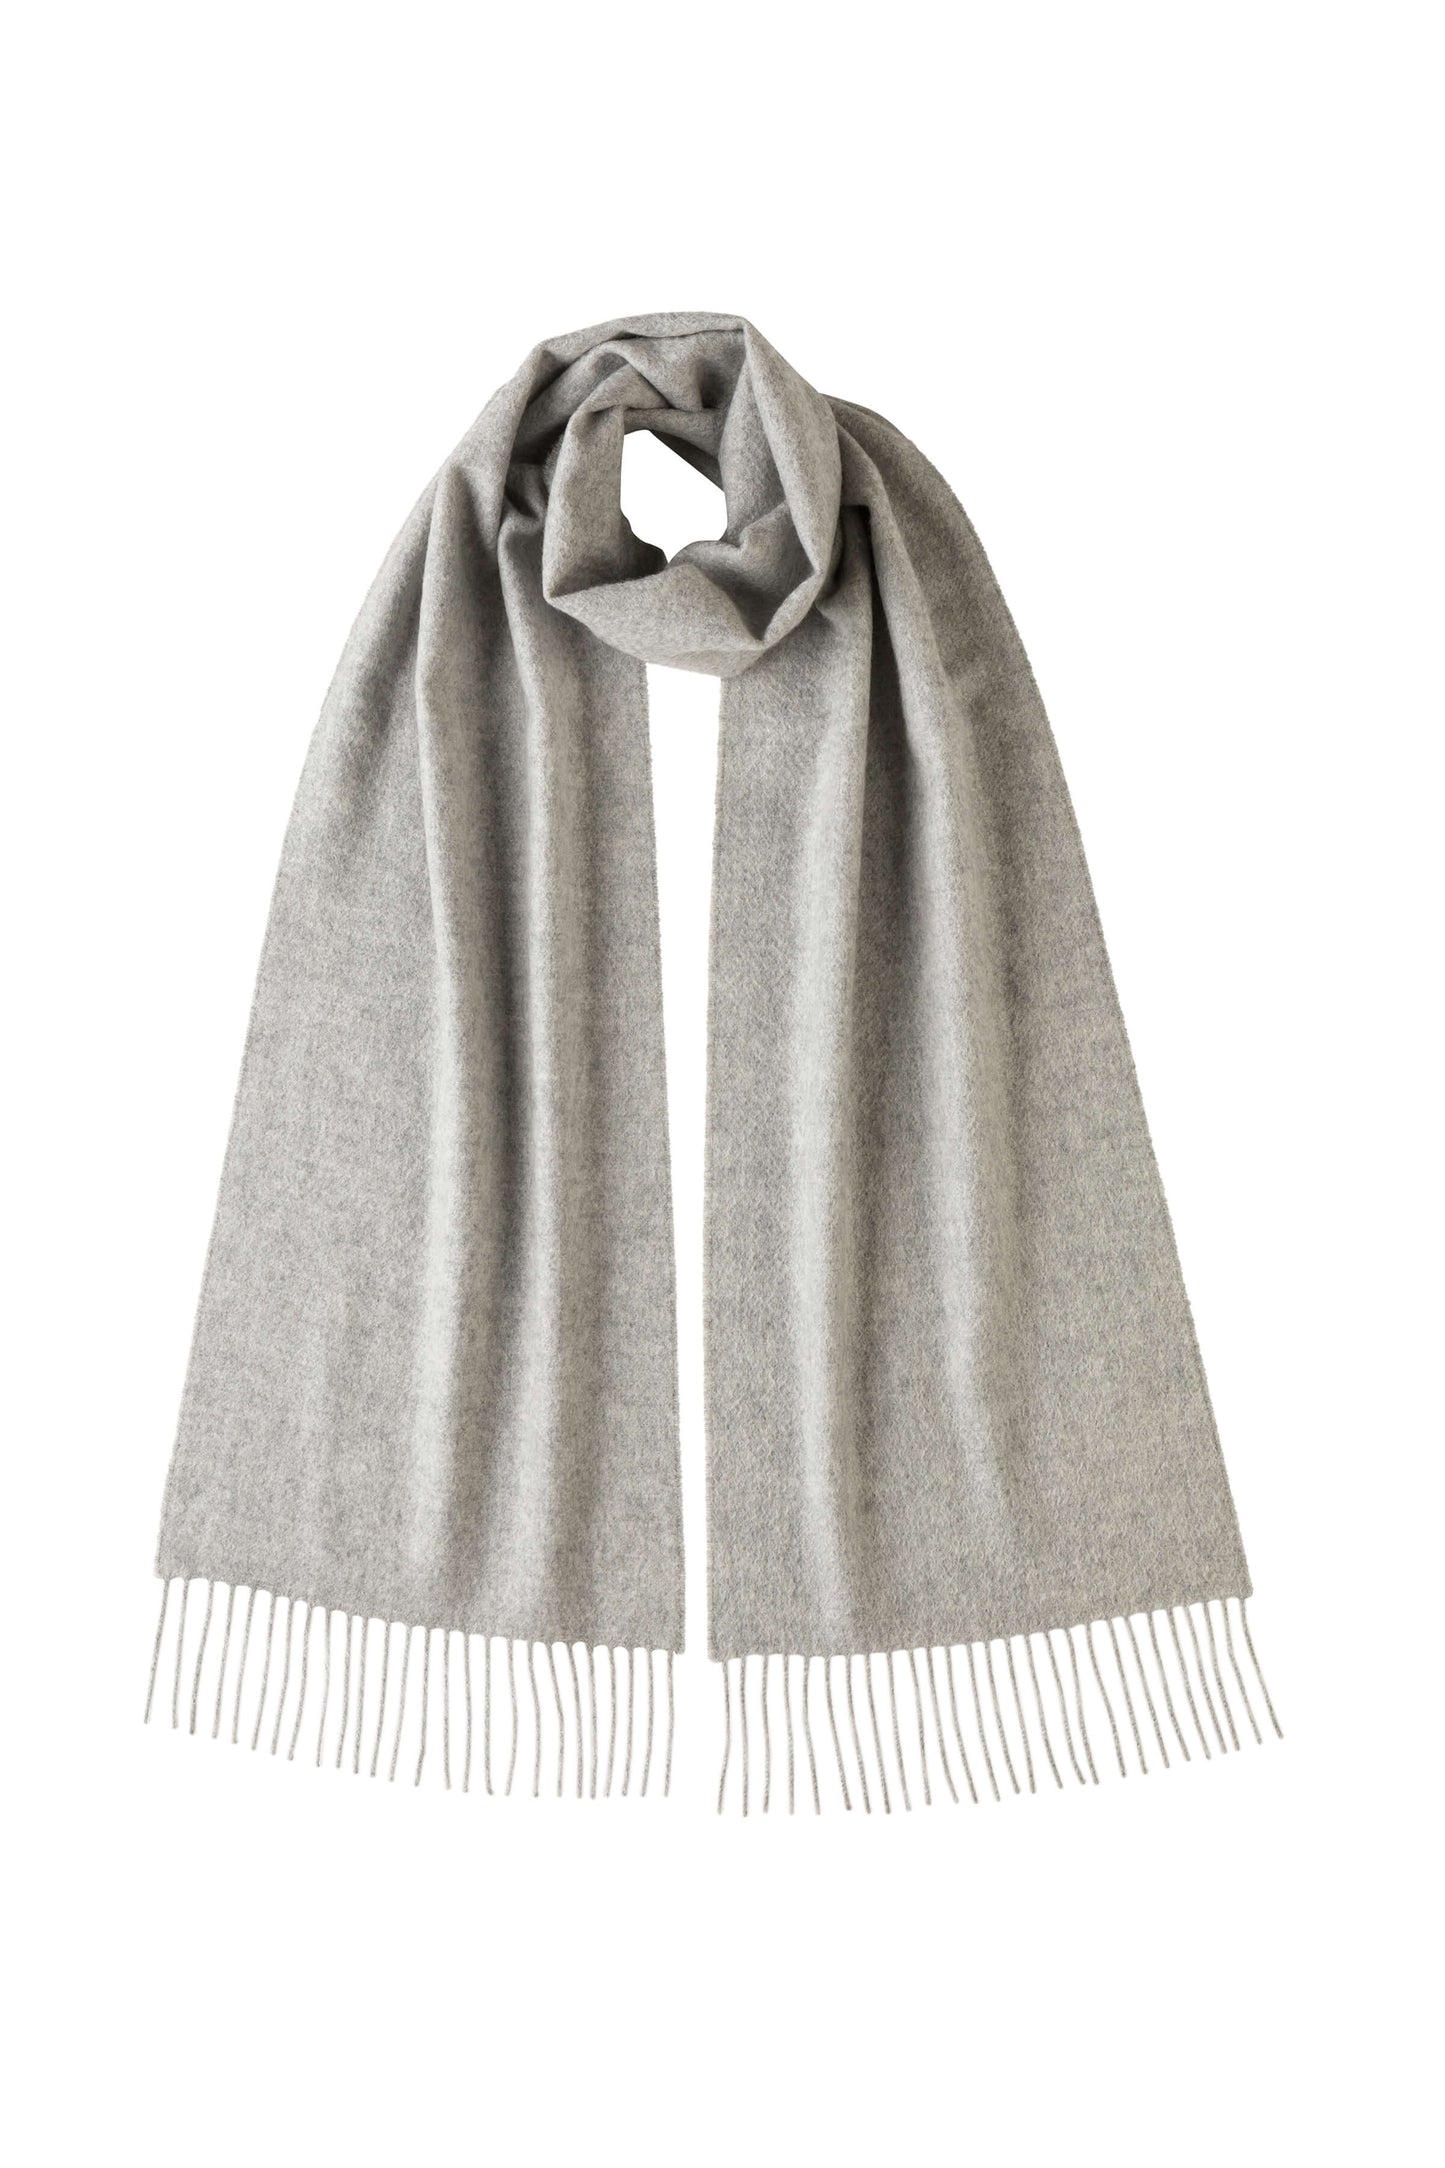 Johnstons of Elgin AW24 Woven Accessory Light Grey Cashmere Scarf WA000016HA0200ONE